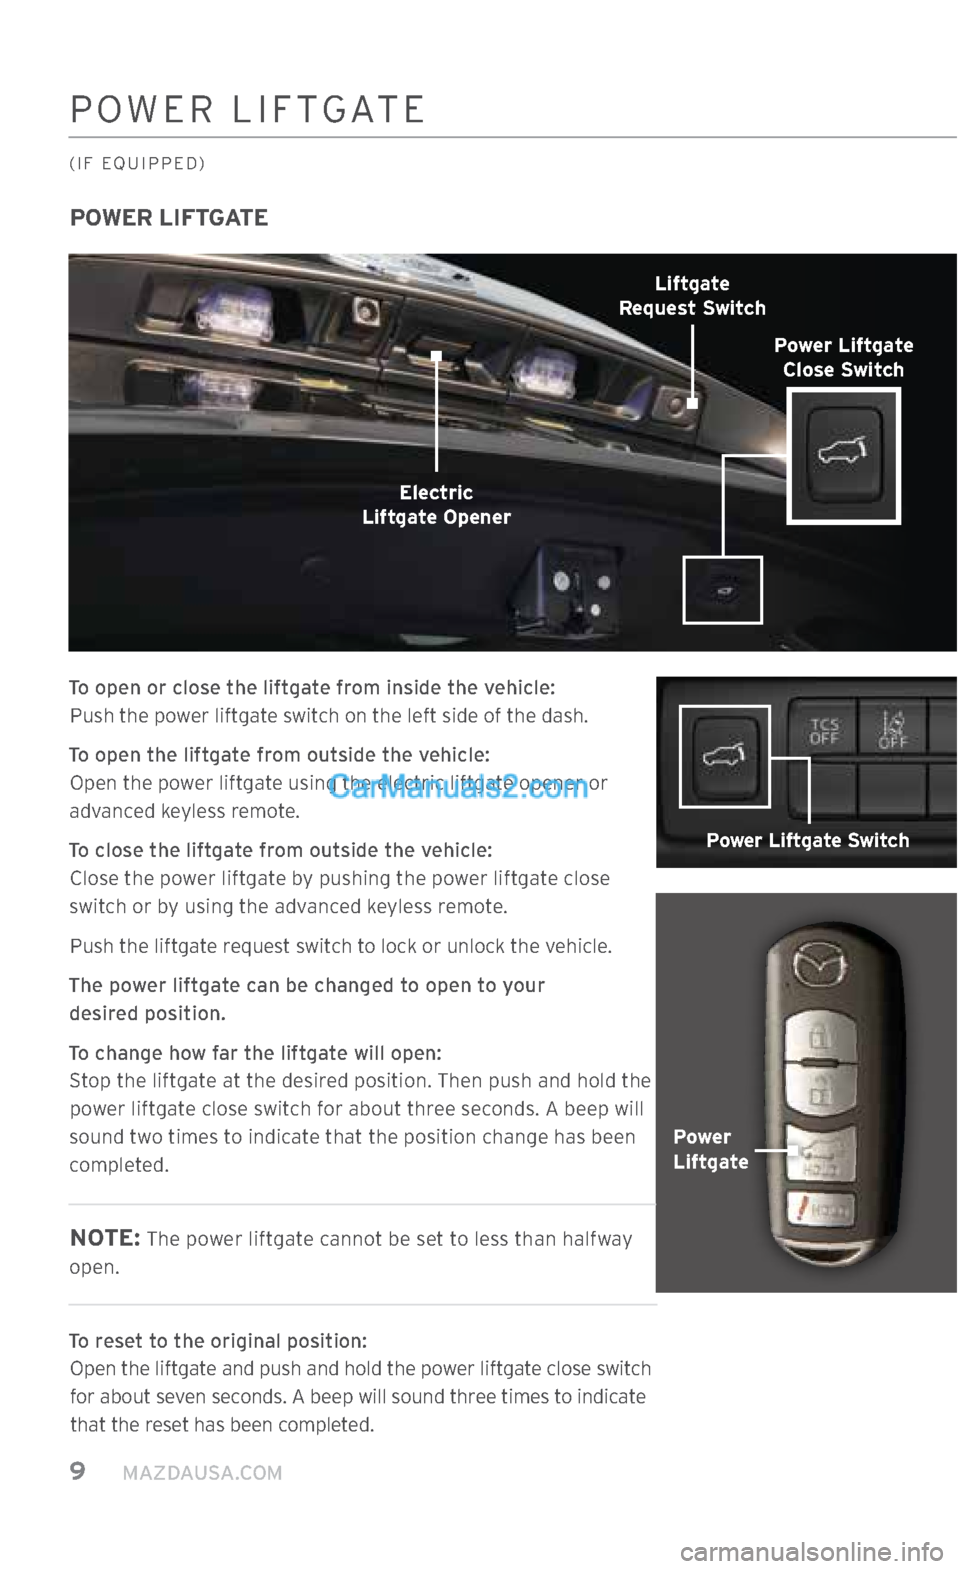 MAZDA MODEL CX-5 2017  Smart Start Guide (in English) 9     MAZDAUSA.COM
POWER LIFTGATE
To open or close the liftgate from inside the vehicle:  
Push the power liftgate switch on the left side of the dash.
To open the liftgate from outside the vehicle:  